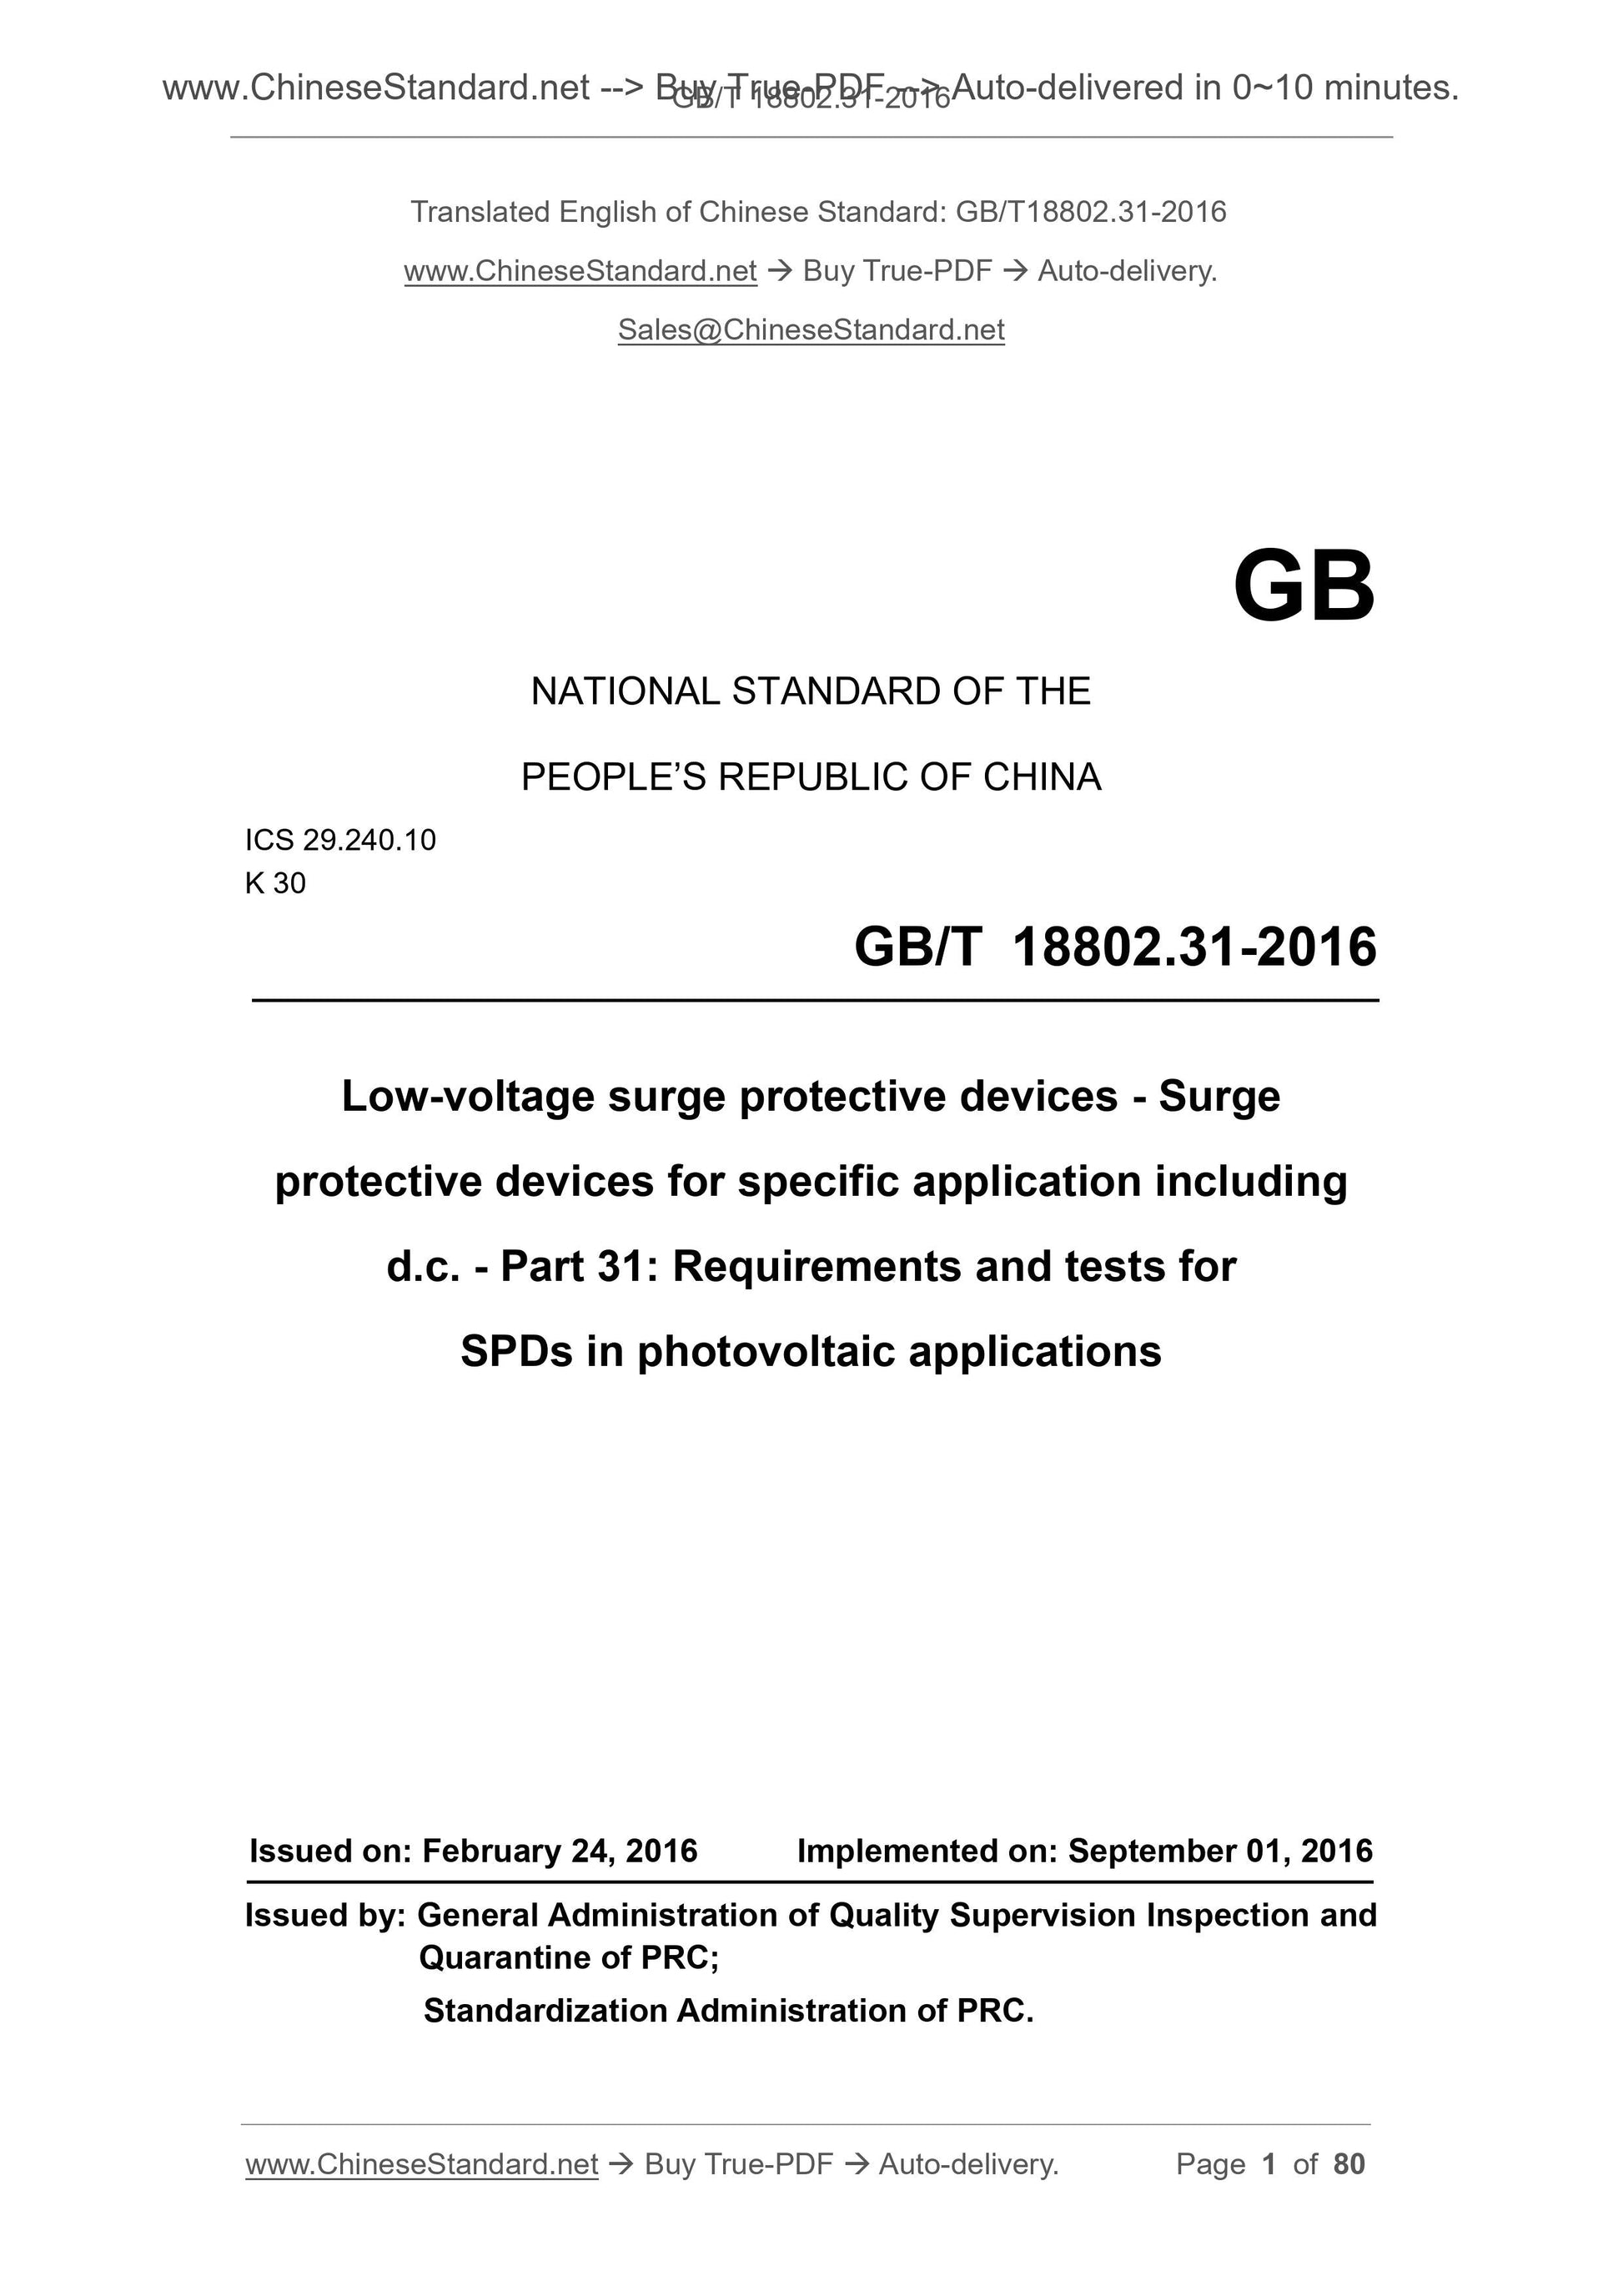 GB/T 18802.31-2016 Page 1